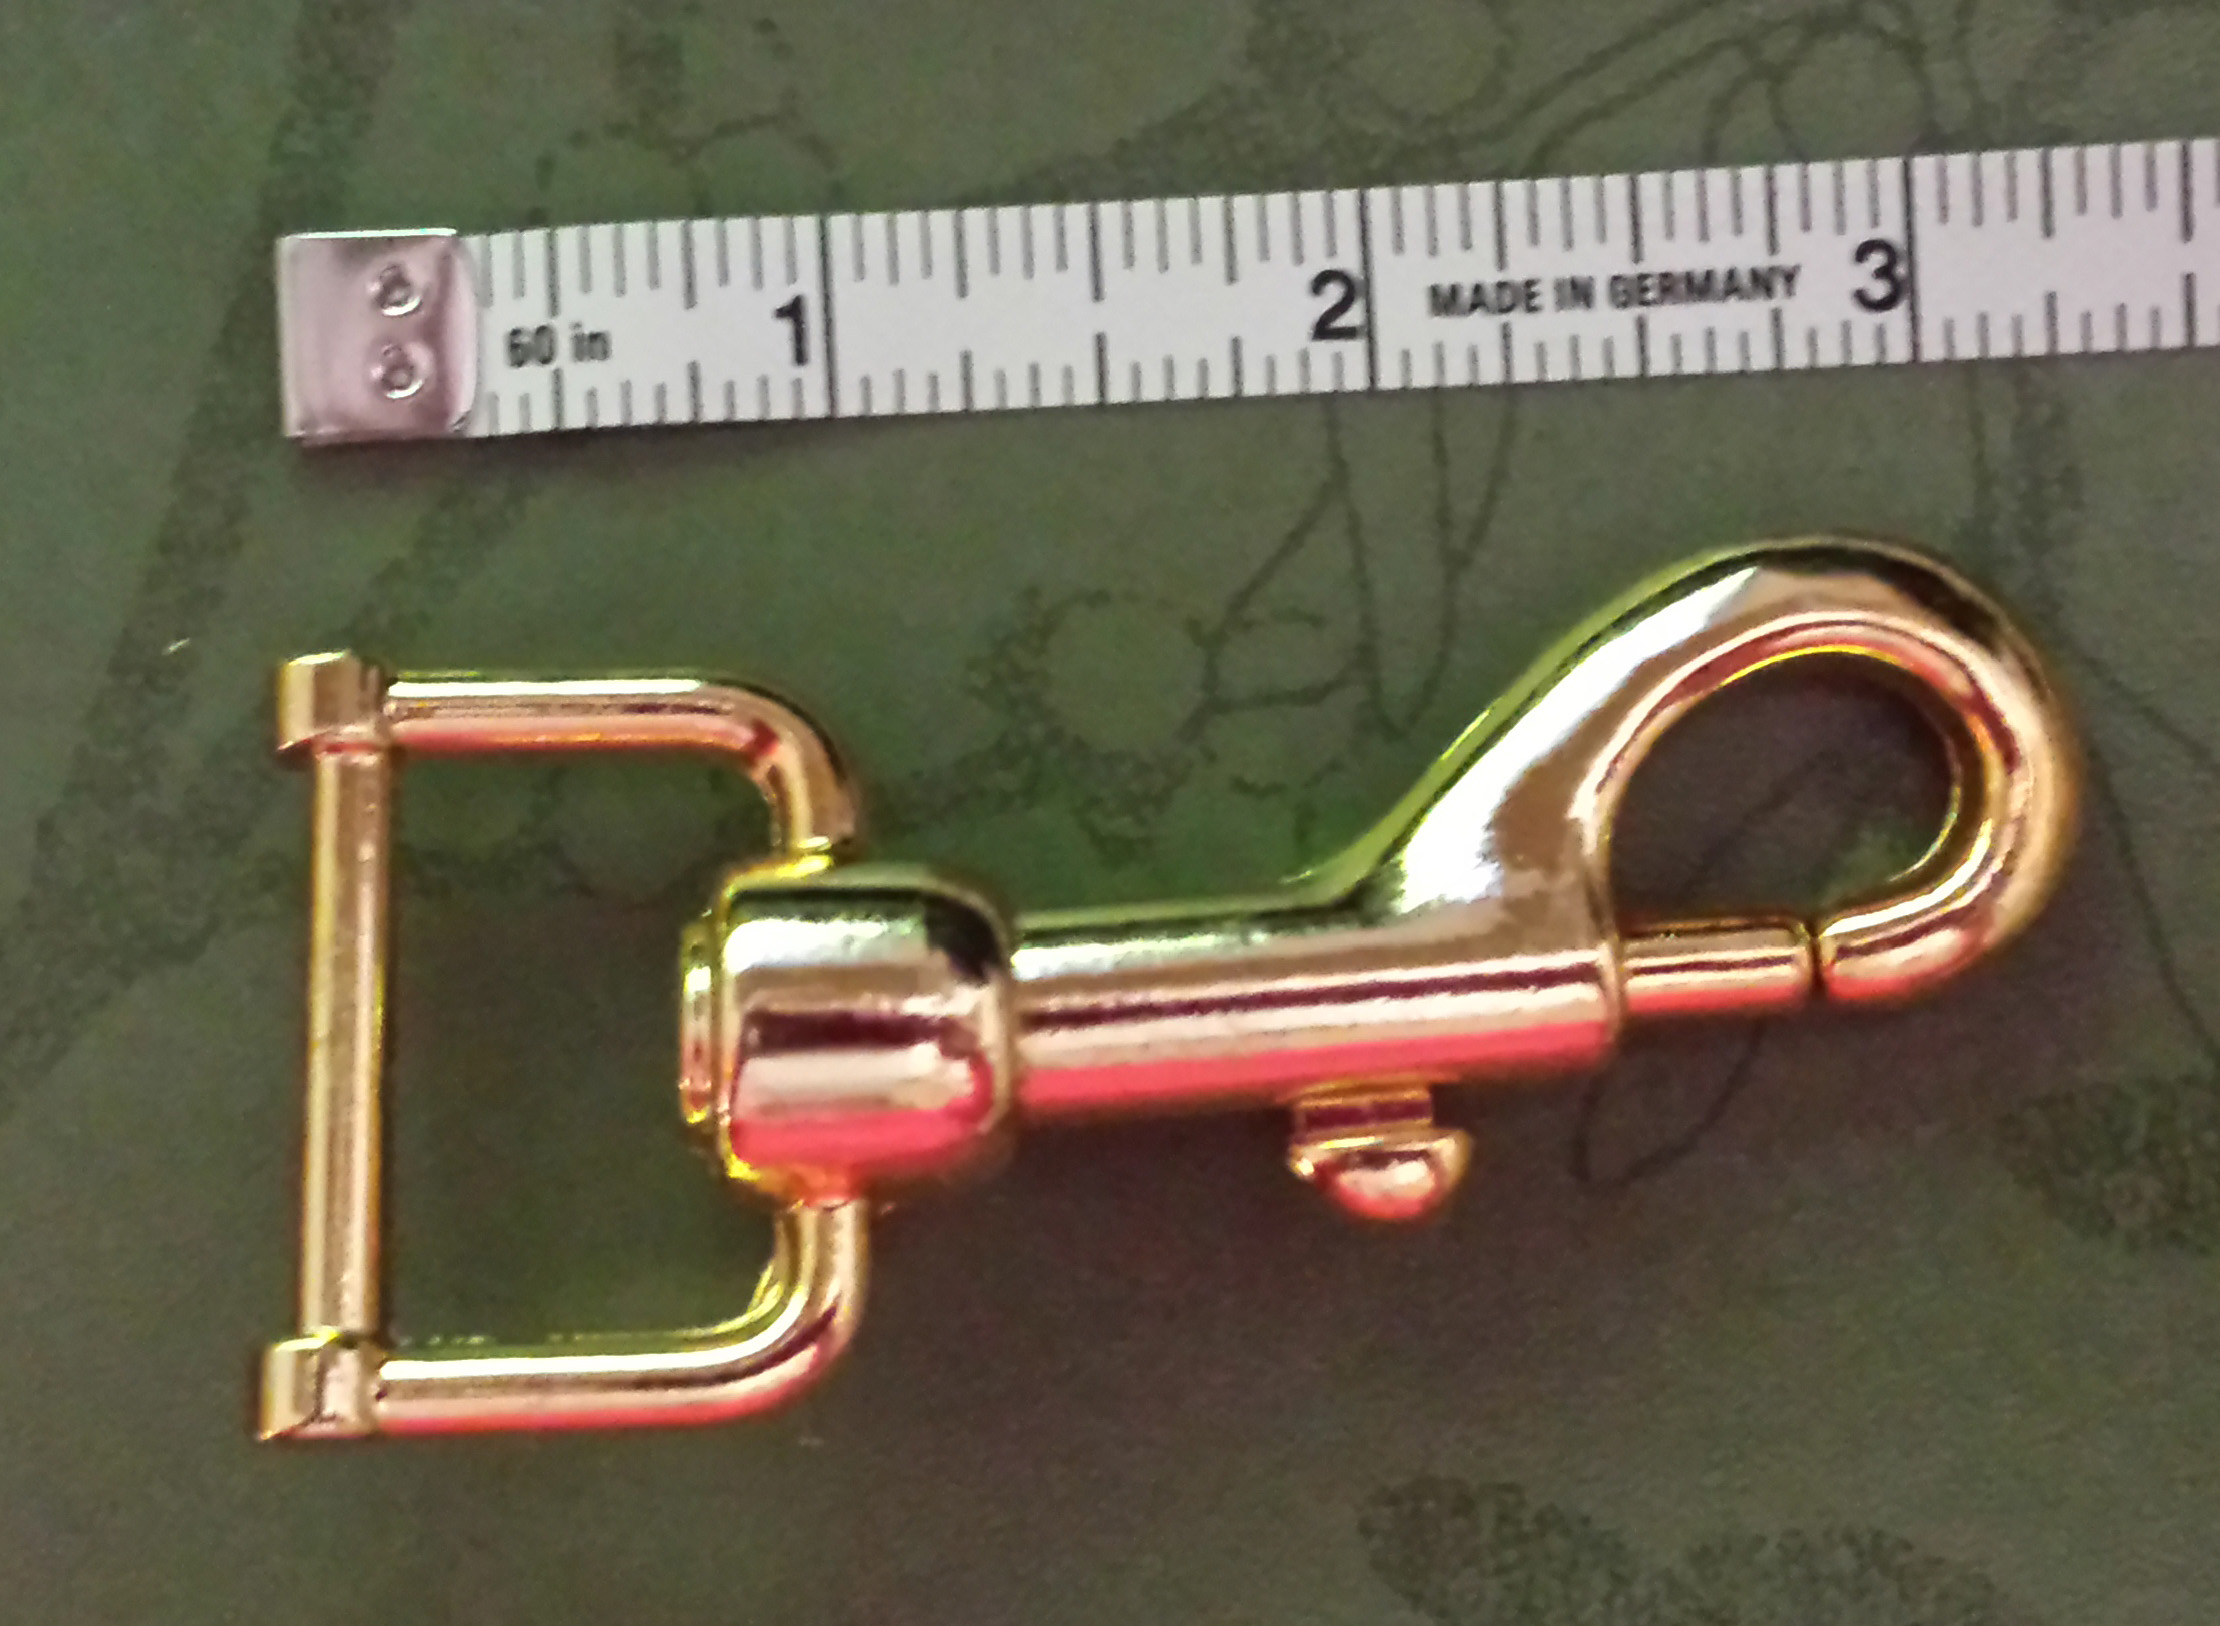 Lobster Clasp 3 inches long with 1 inch wide Swivel - Gold Finish